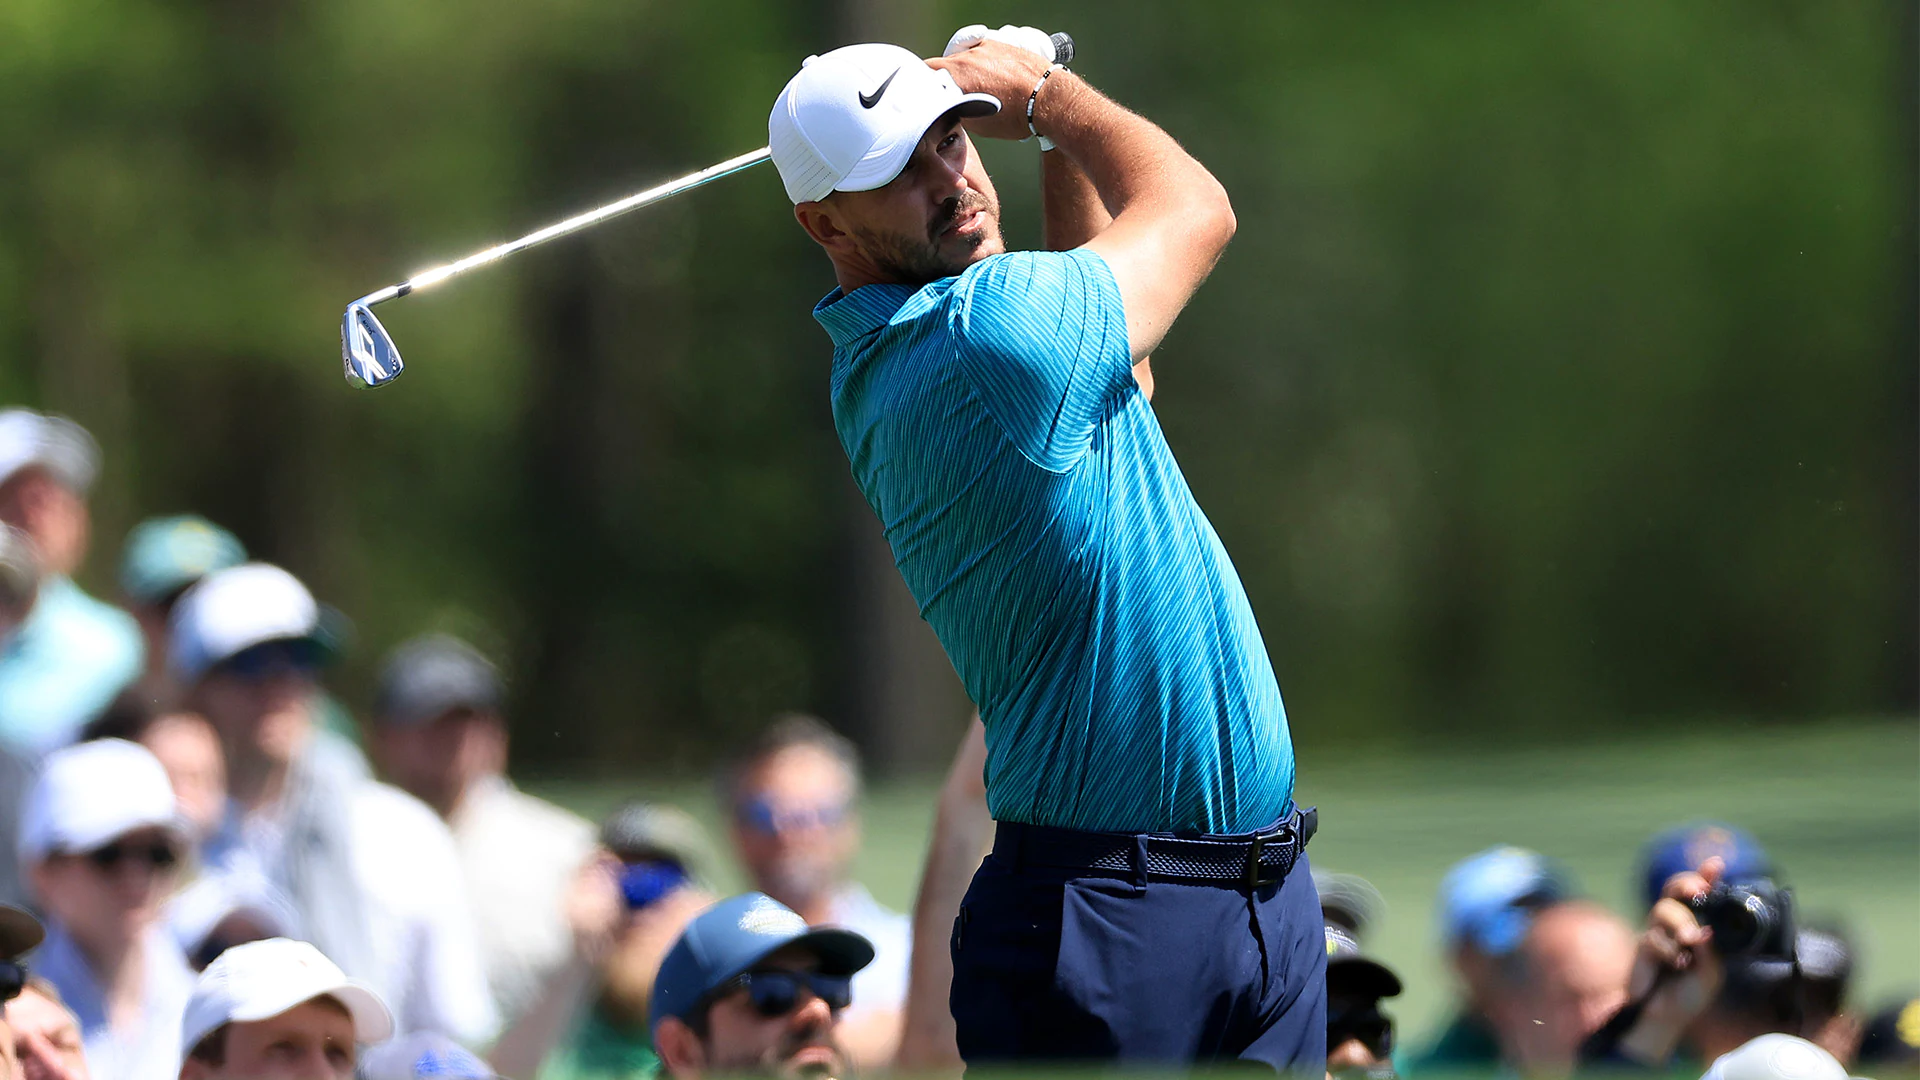 Brooks Koepka has inkling of what Tiger Woods faces in return at Augusta National 2